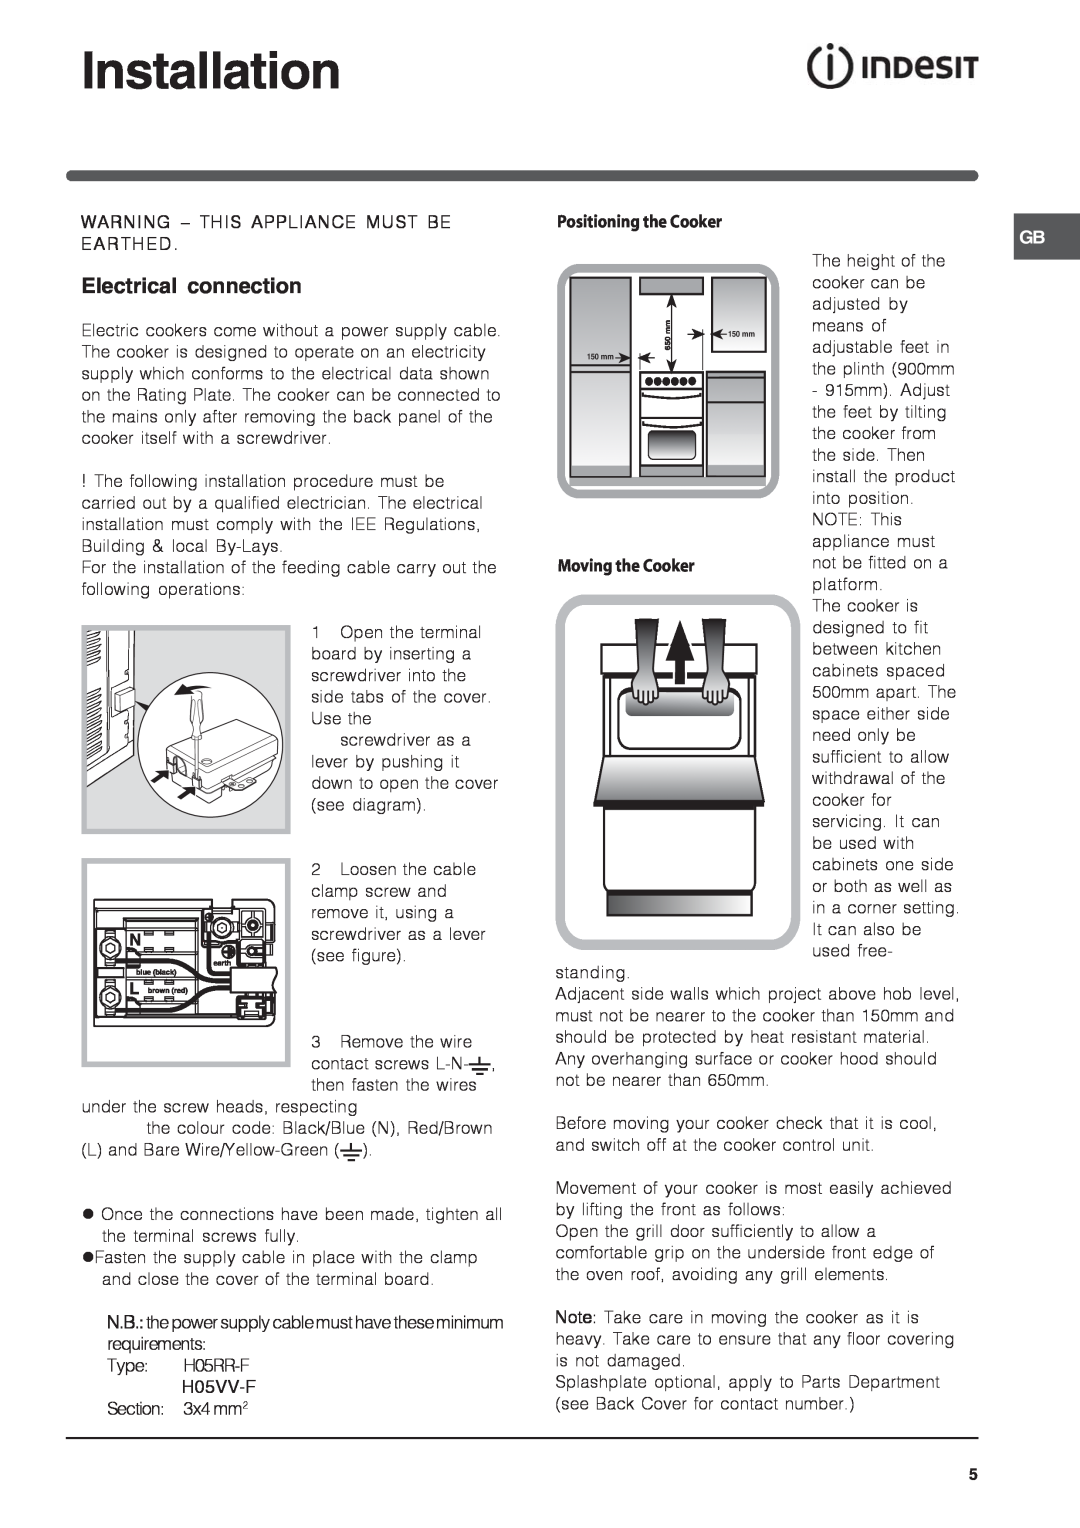 Indesit IT50E1 S Installation, Electrical connection, Warning - This Appliance Must Be Earthed, Positioning the Cooker 